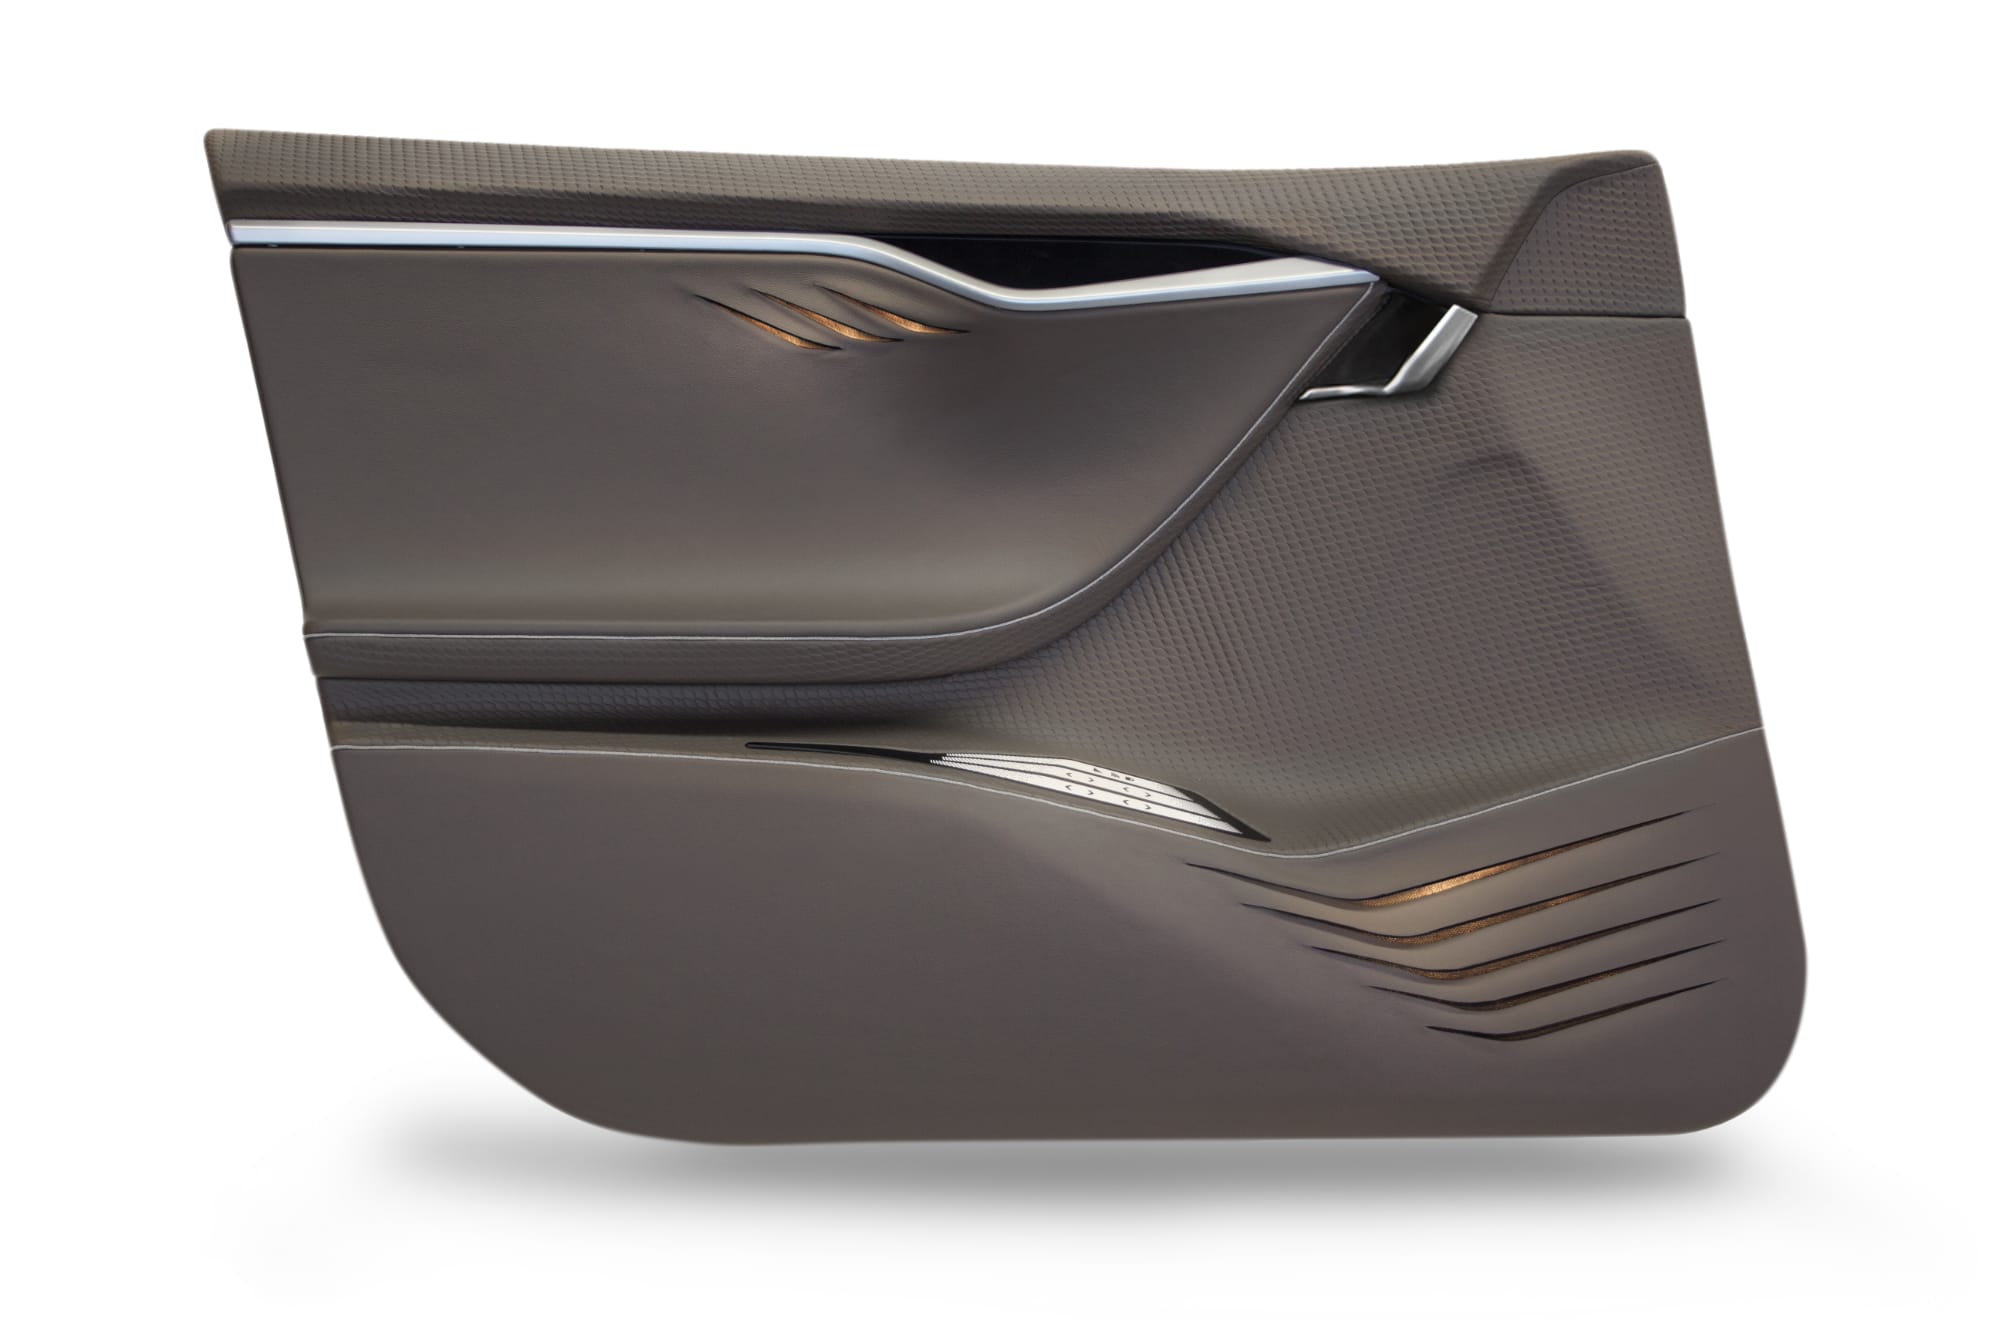 Car door interior trim of dynamic shapes with armrest, door handle and adjustment panel covered in dark leather with integrated indirect lighting through grooves